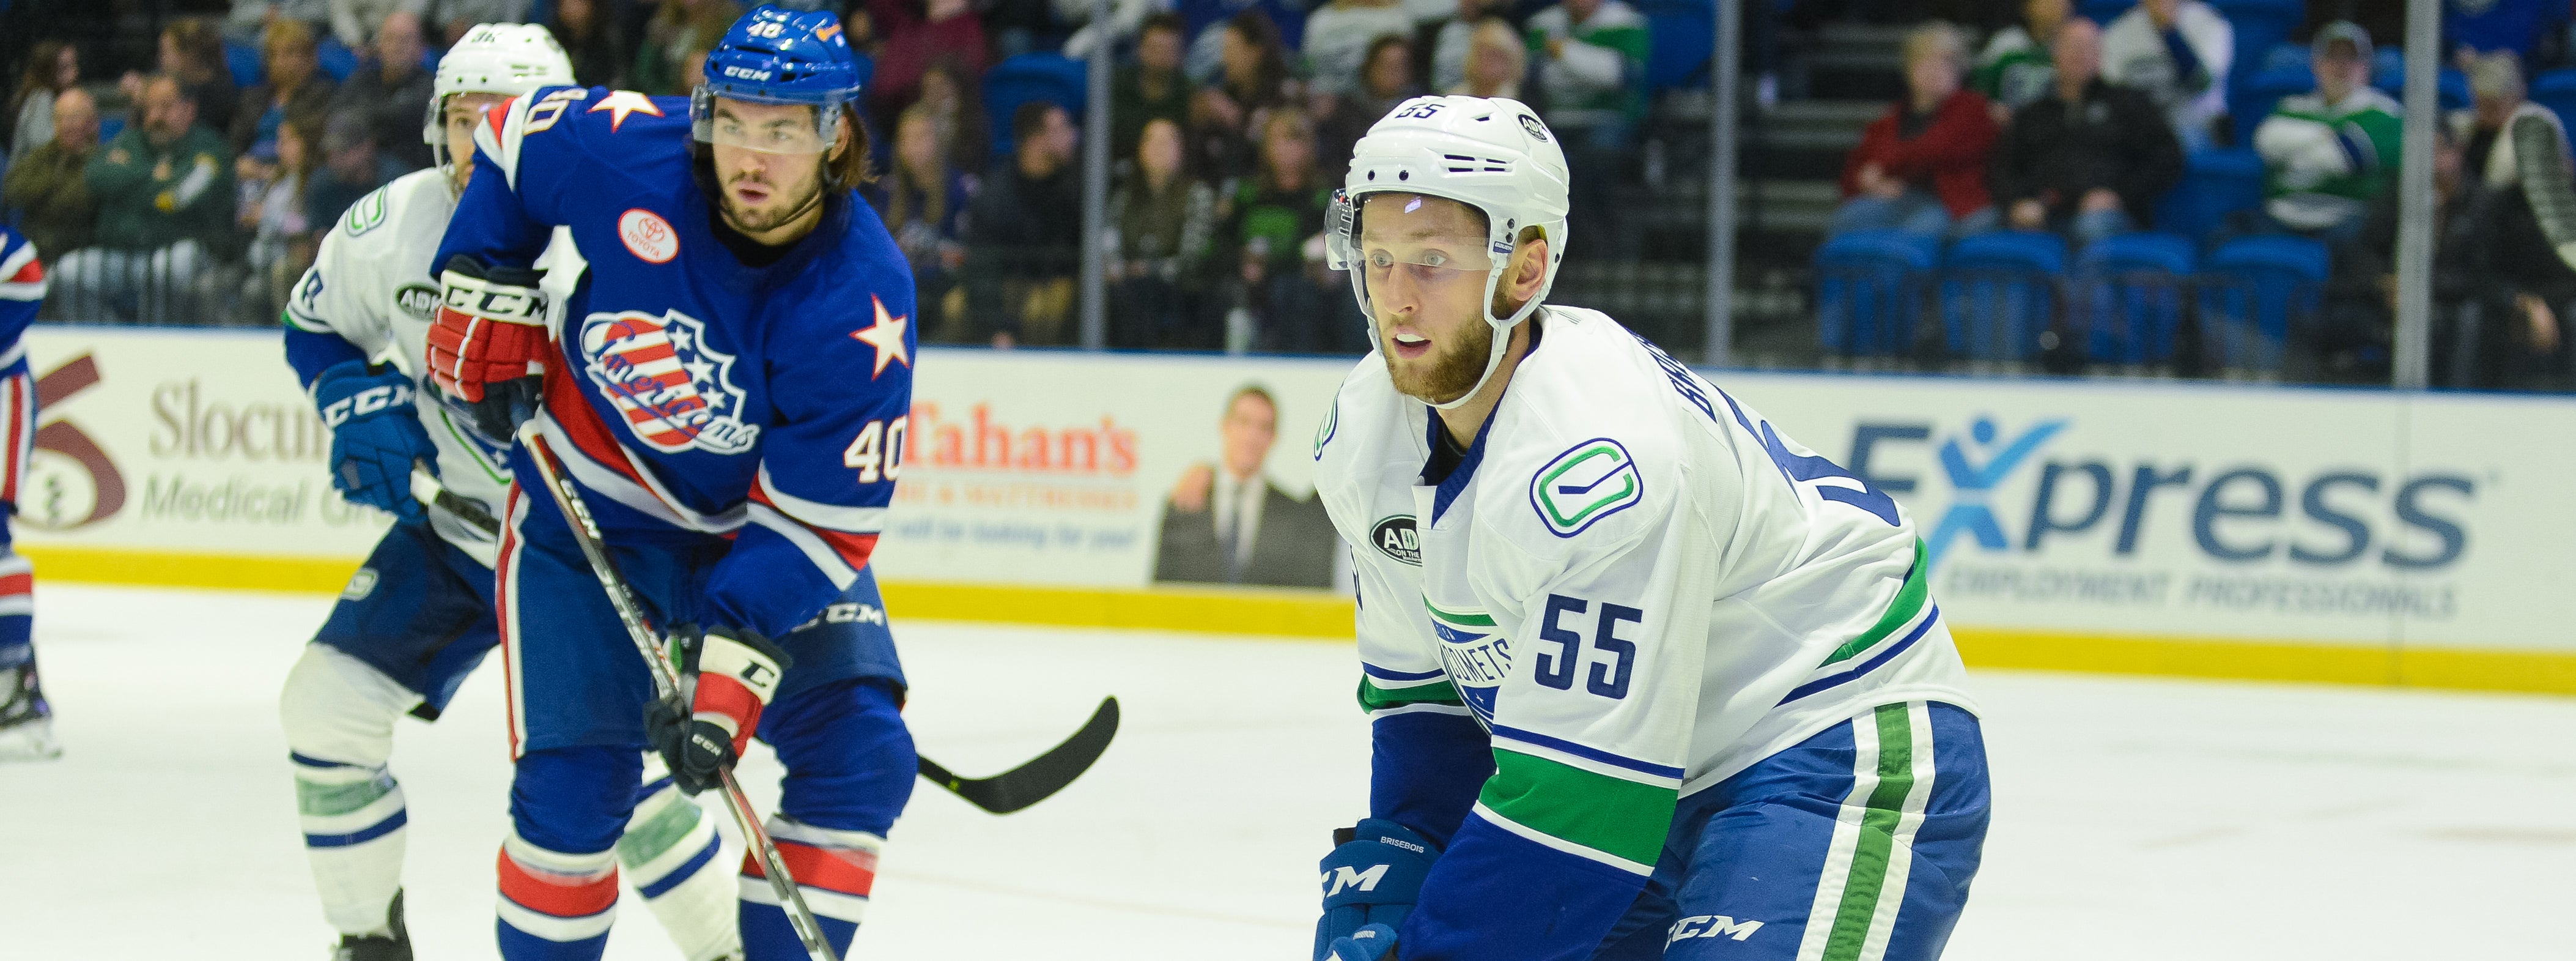 COMETS LOOK TO BOUNCE BACK AGAINST AMERKS